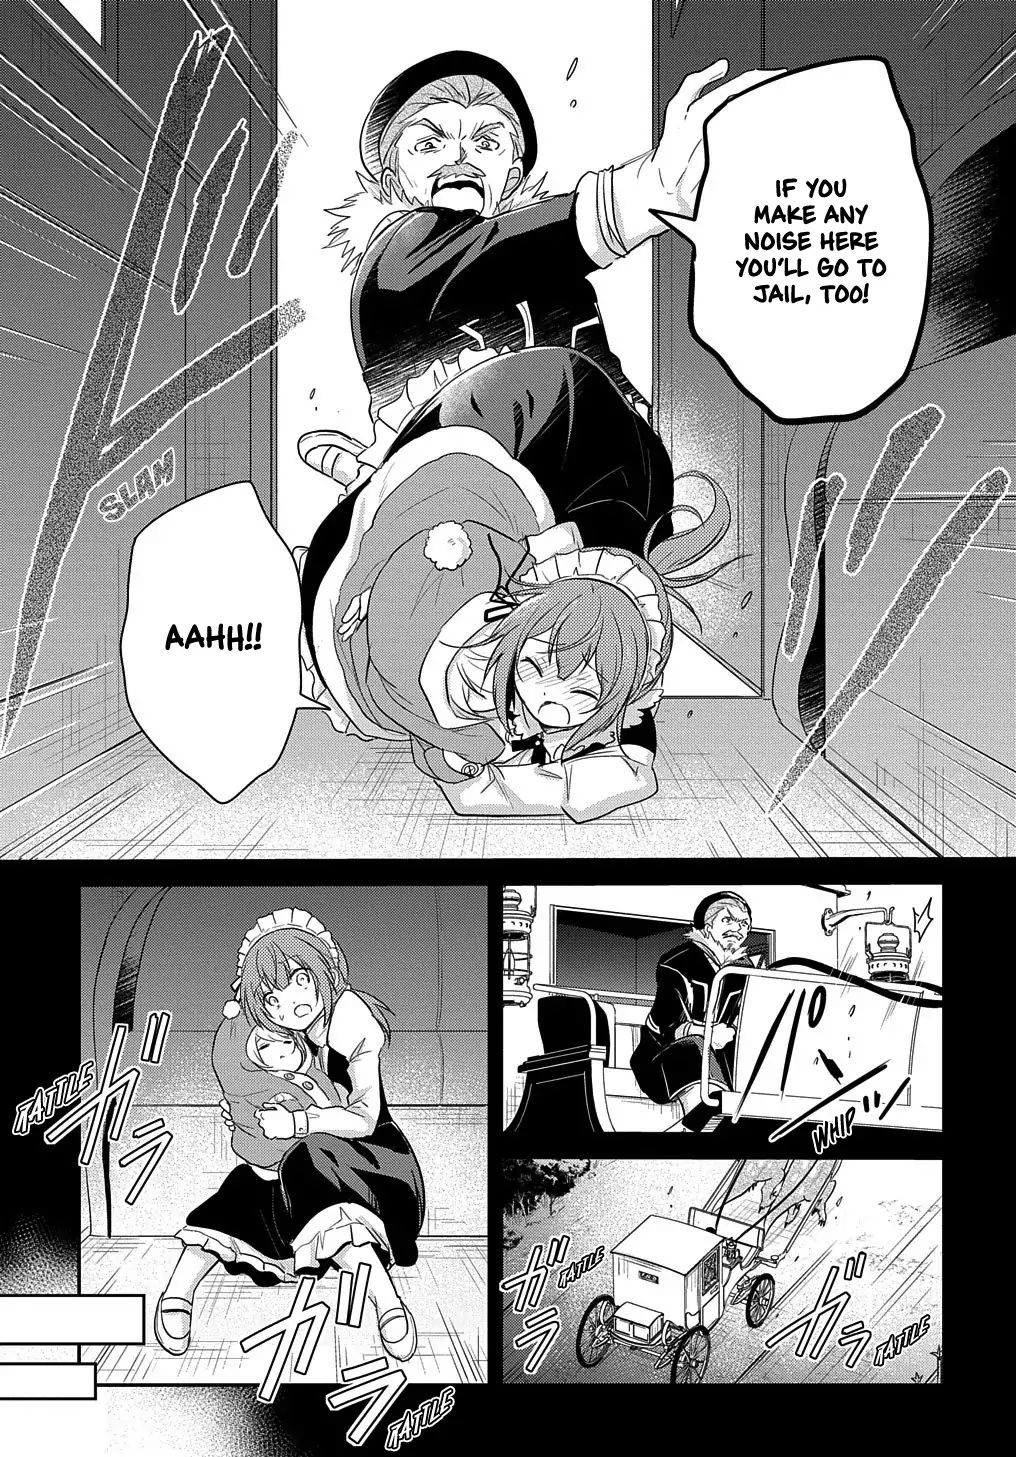 The Reborn Little Girl Won’t Give Up chapter 4 page 7